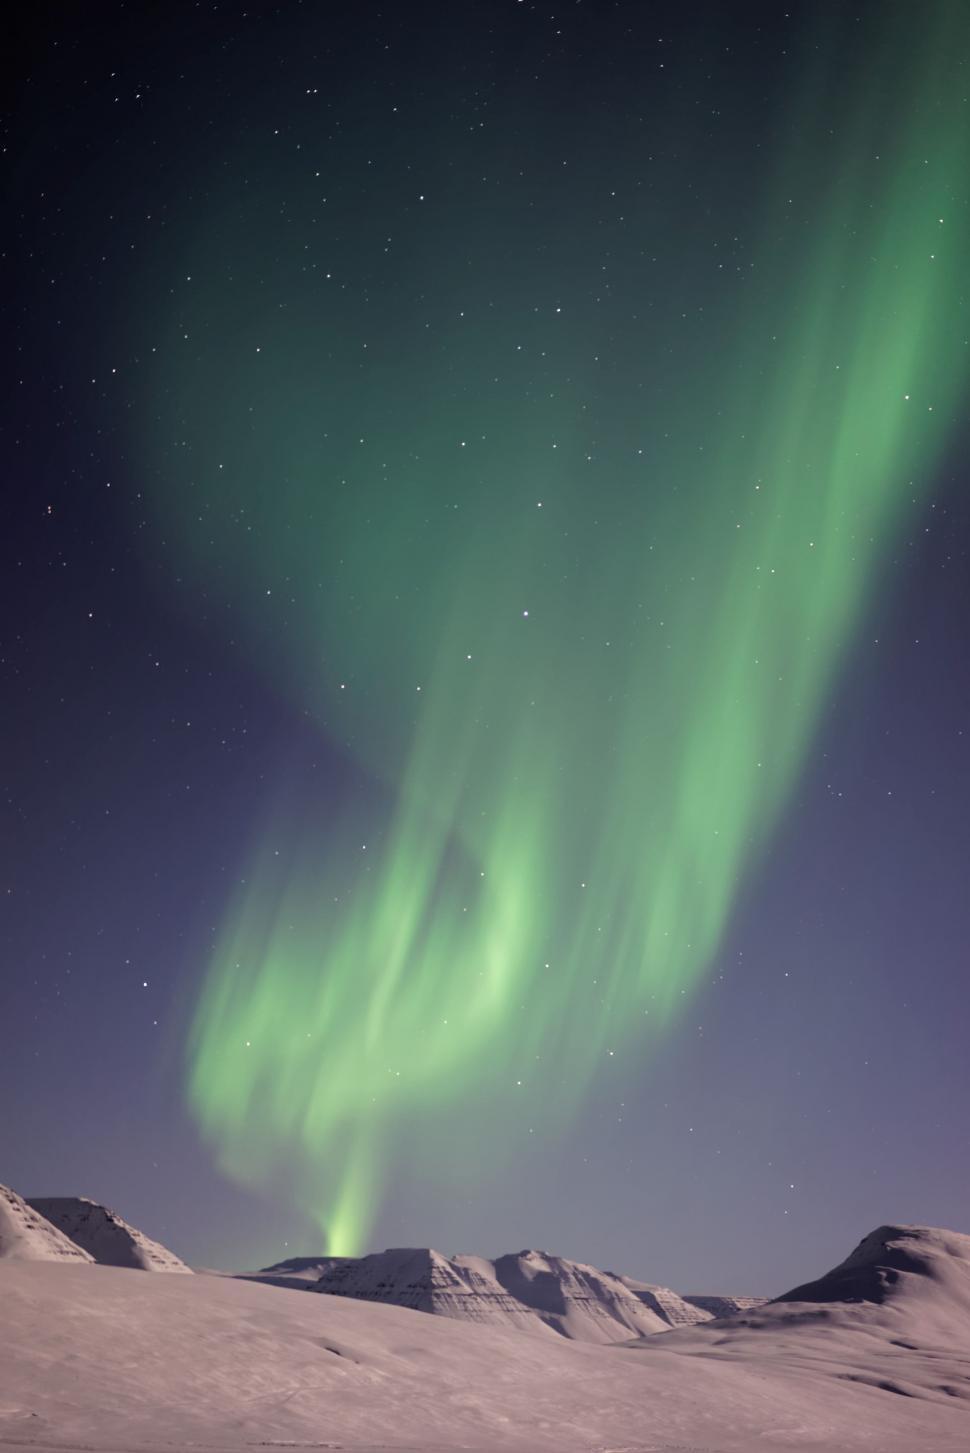 Free Image of Green and White Aurora Borealis in the Night Sky 